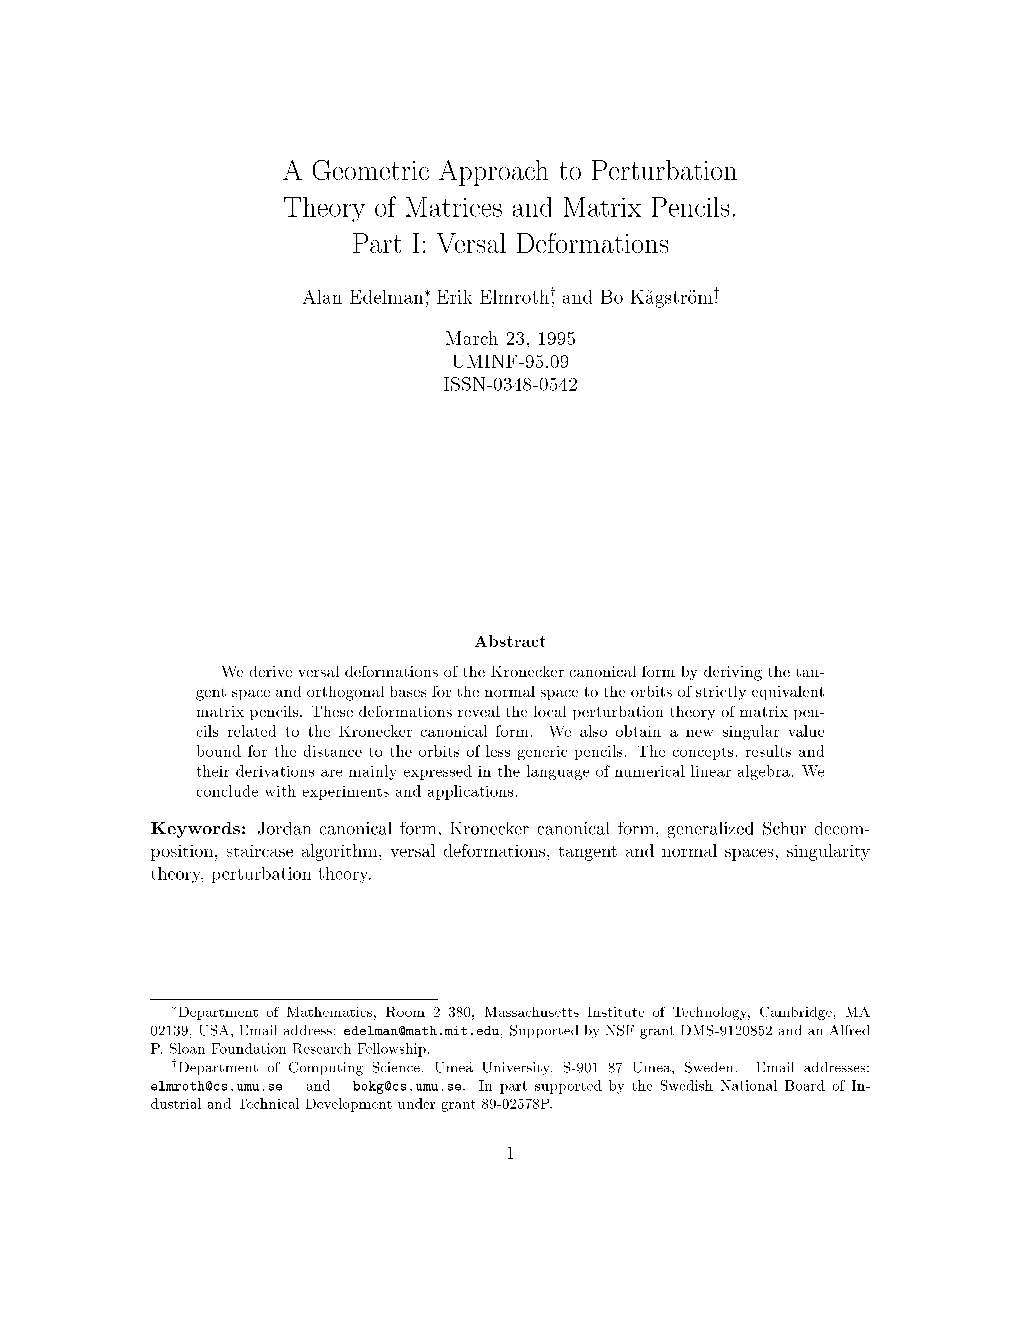 A Geometric Approach to Perturbation Theory of Matrices and Matrix